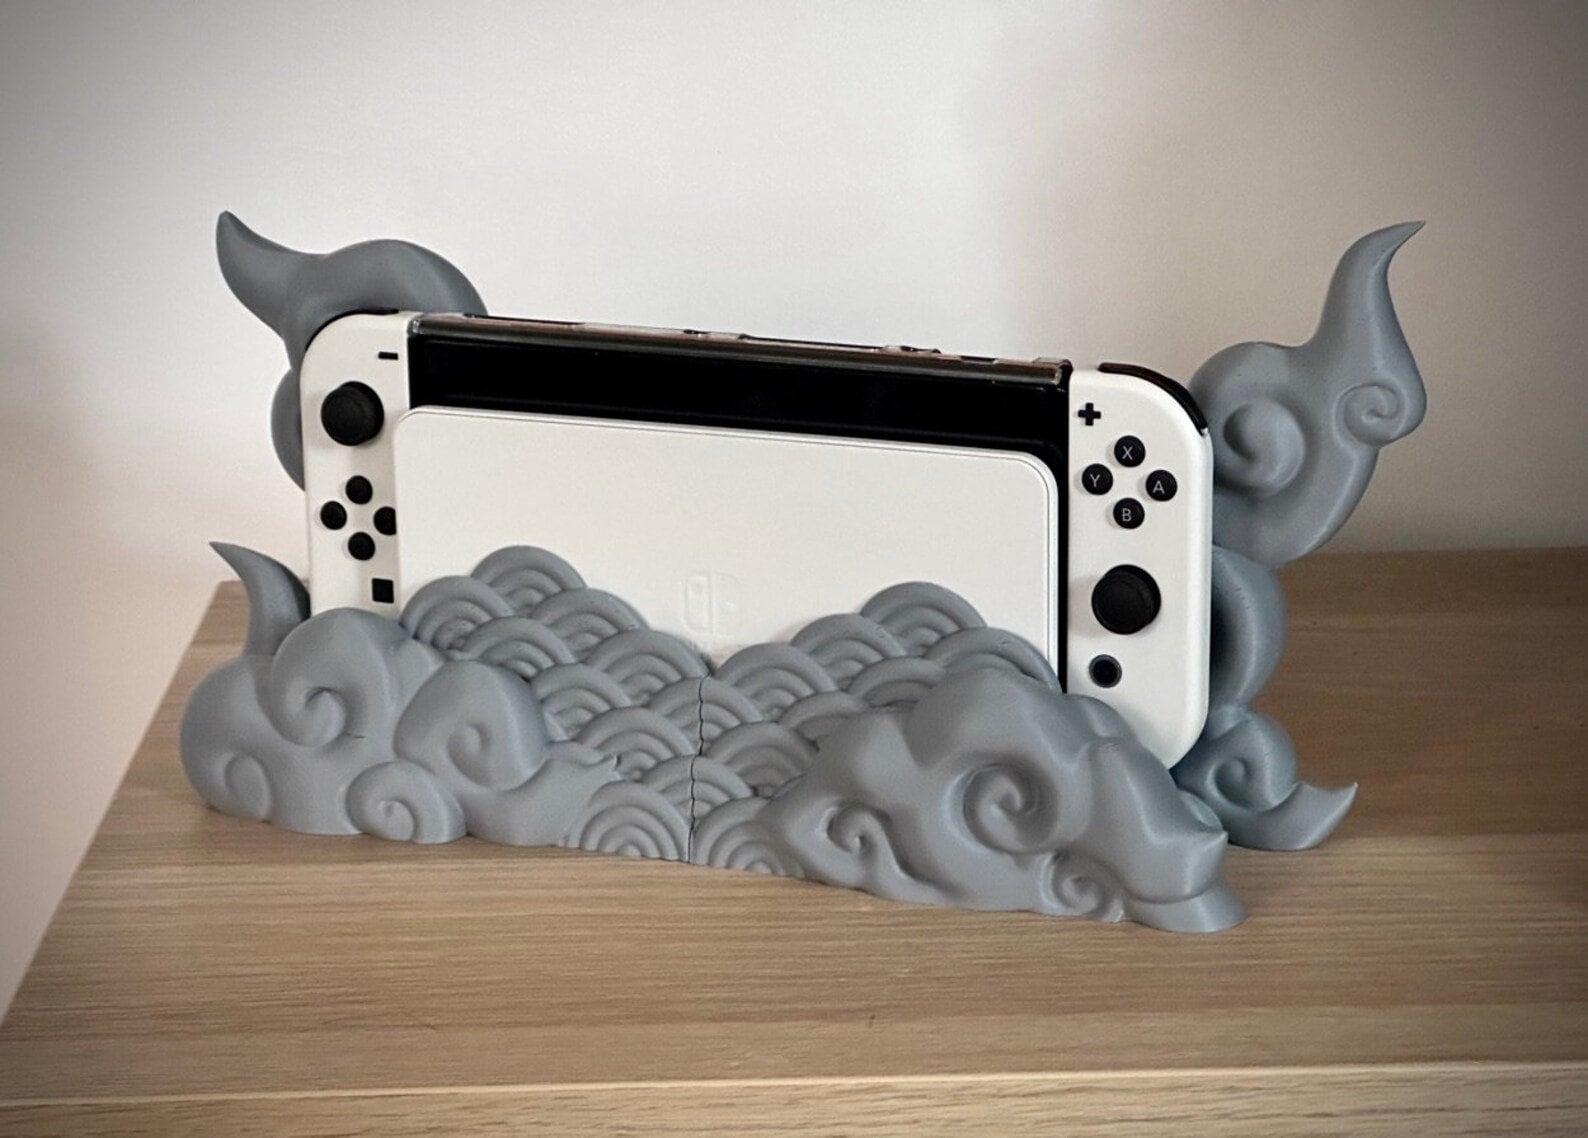 Nintendo Switch Japanese Cloud Dock - Classic and OLED version